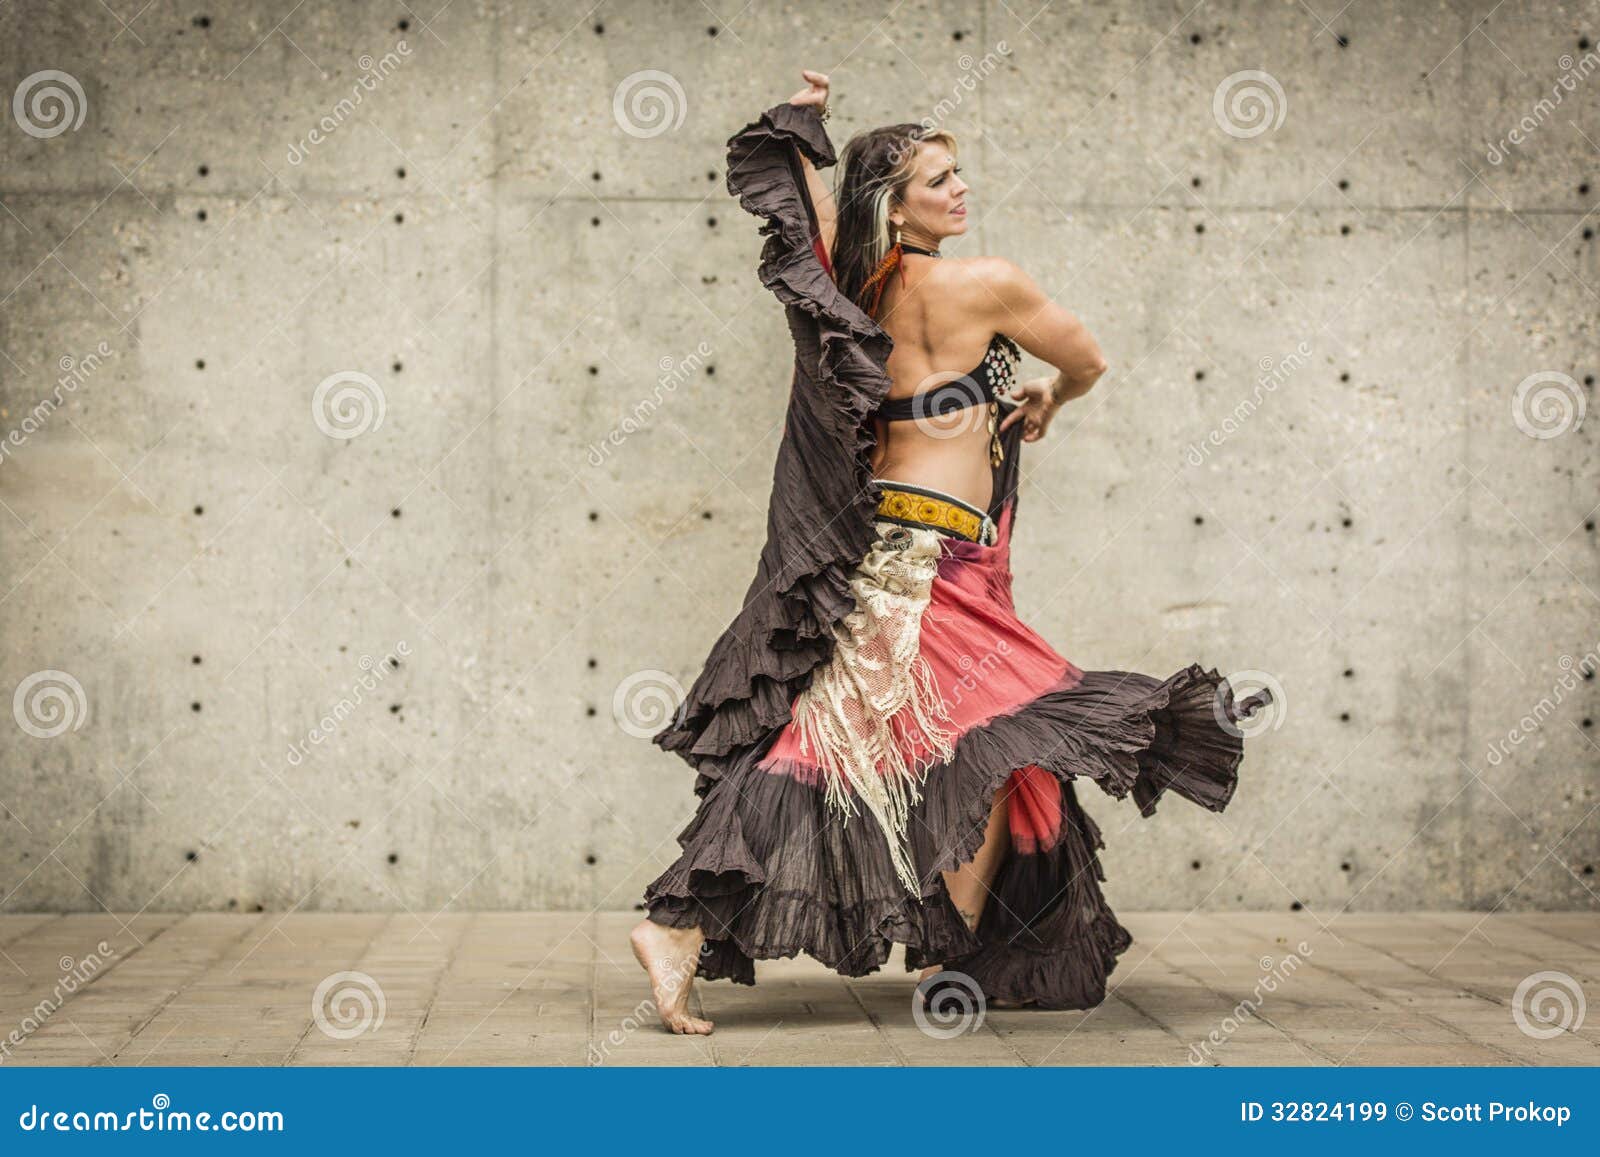 Pin on costume  fusion belly dance